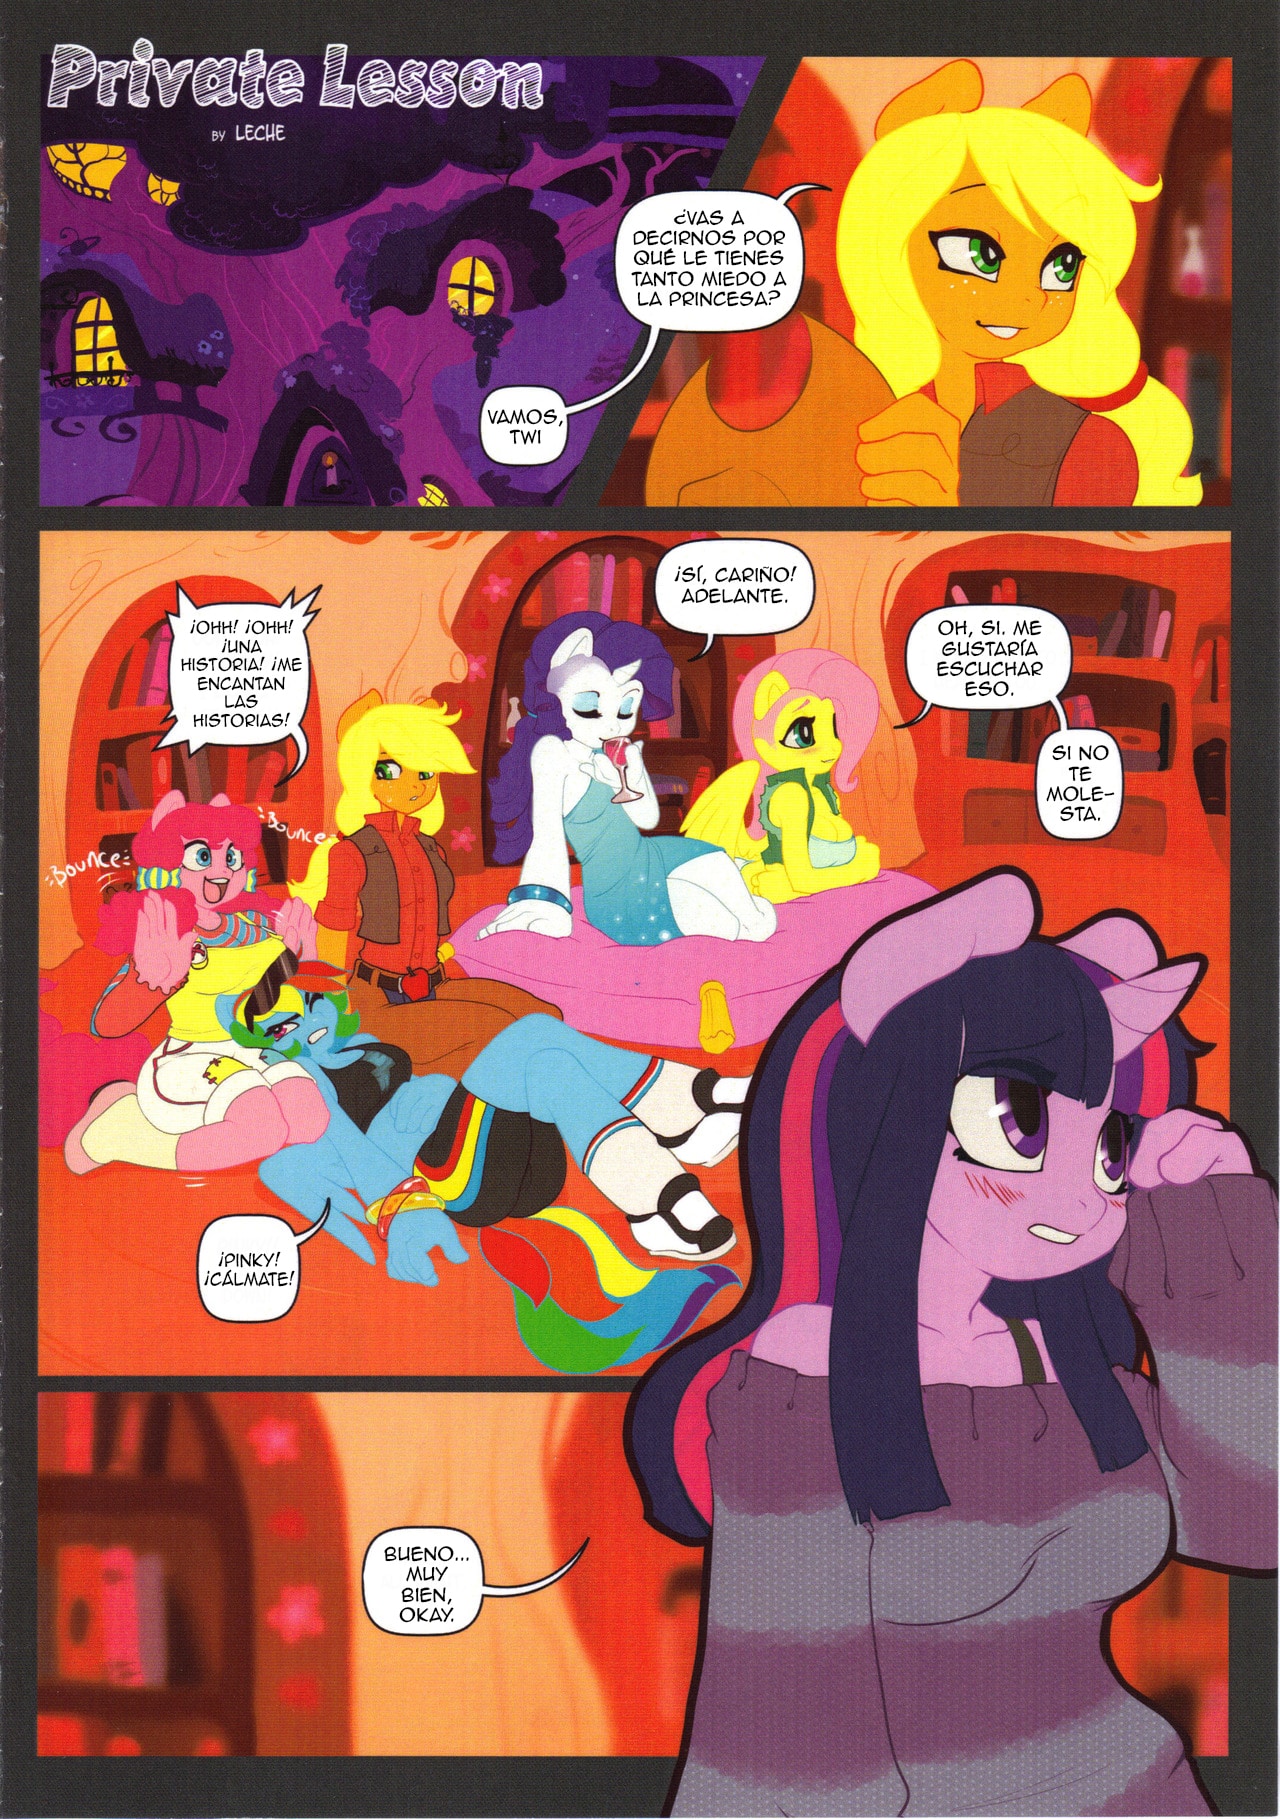 Private Lesson – My Little Pony - 994ae1904d56ab2b1ce5c2a2a7c8aff8